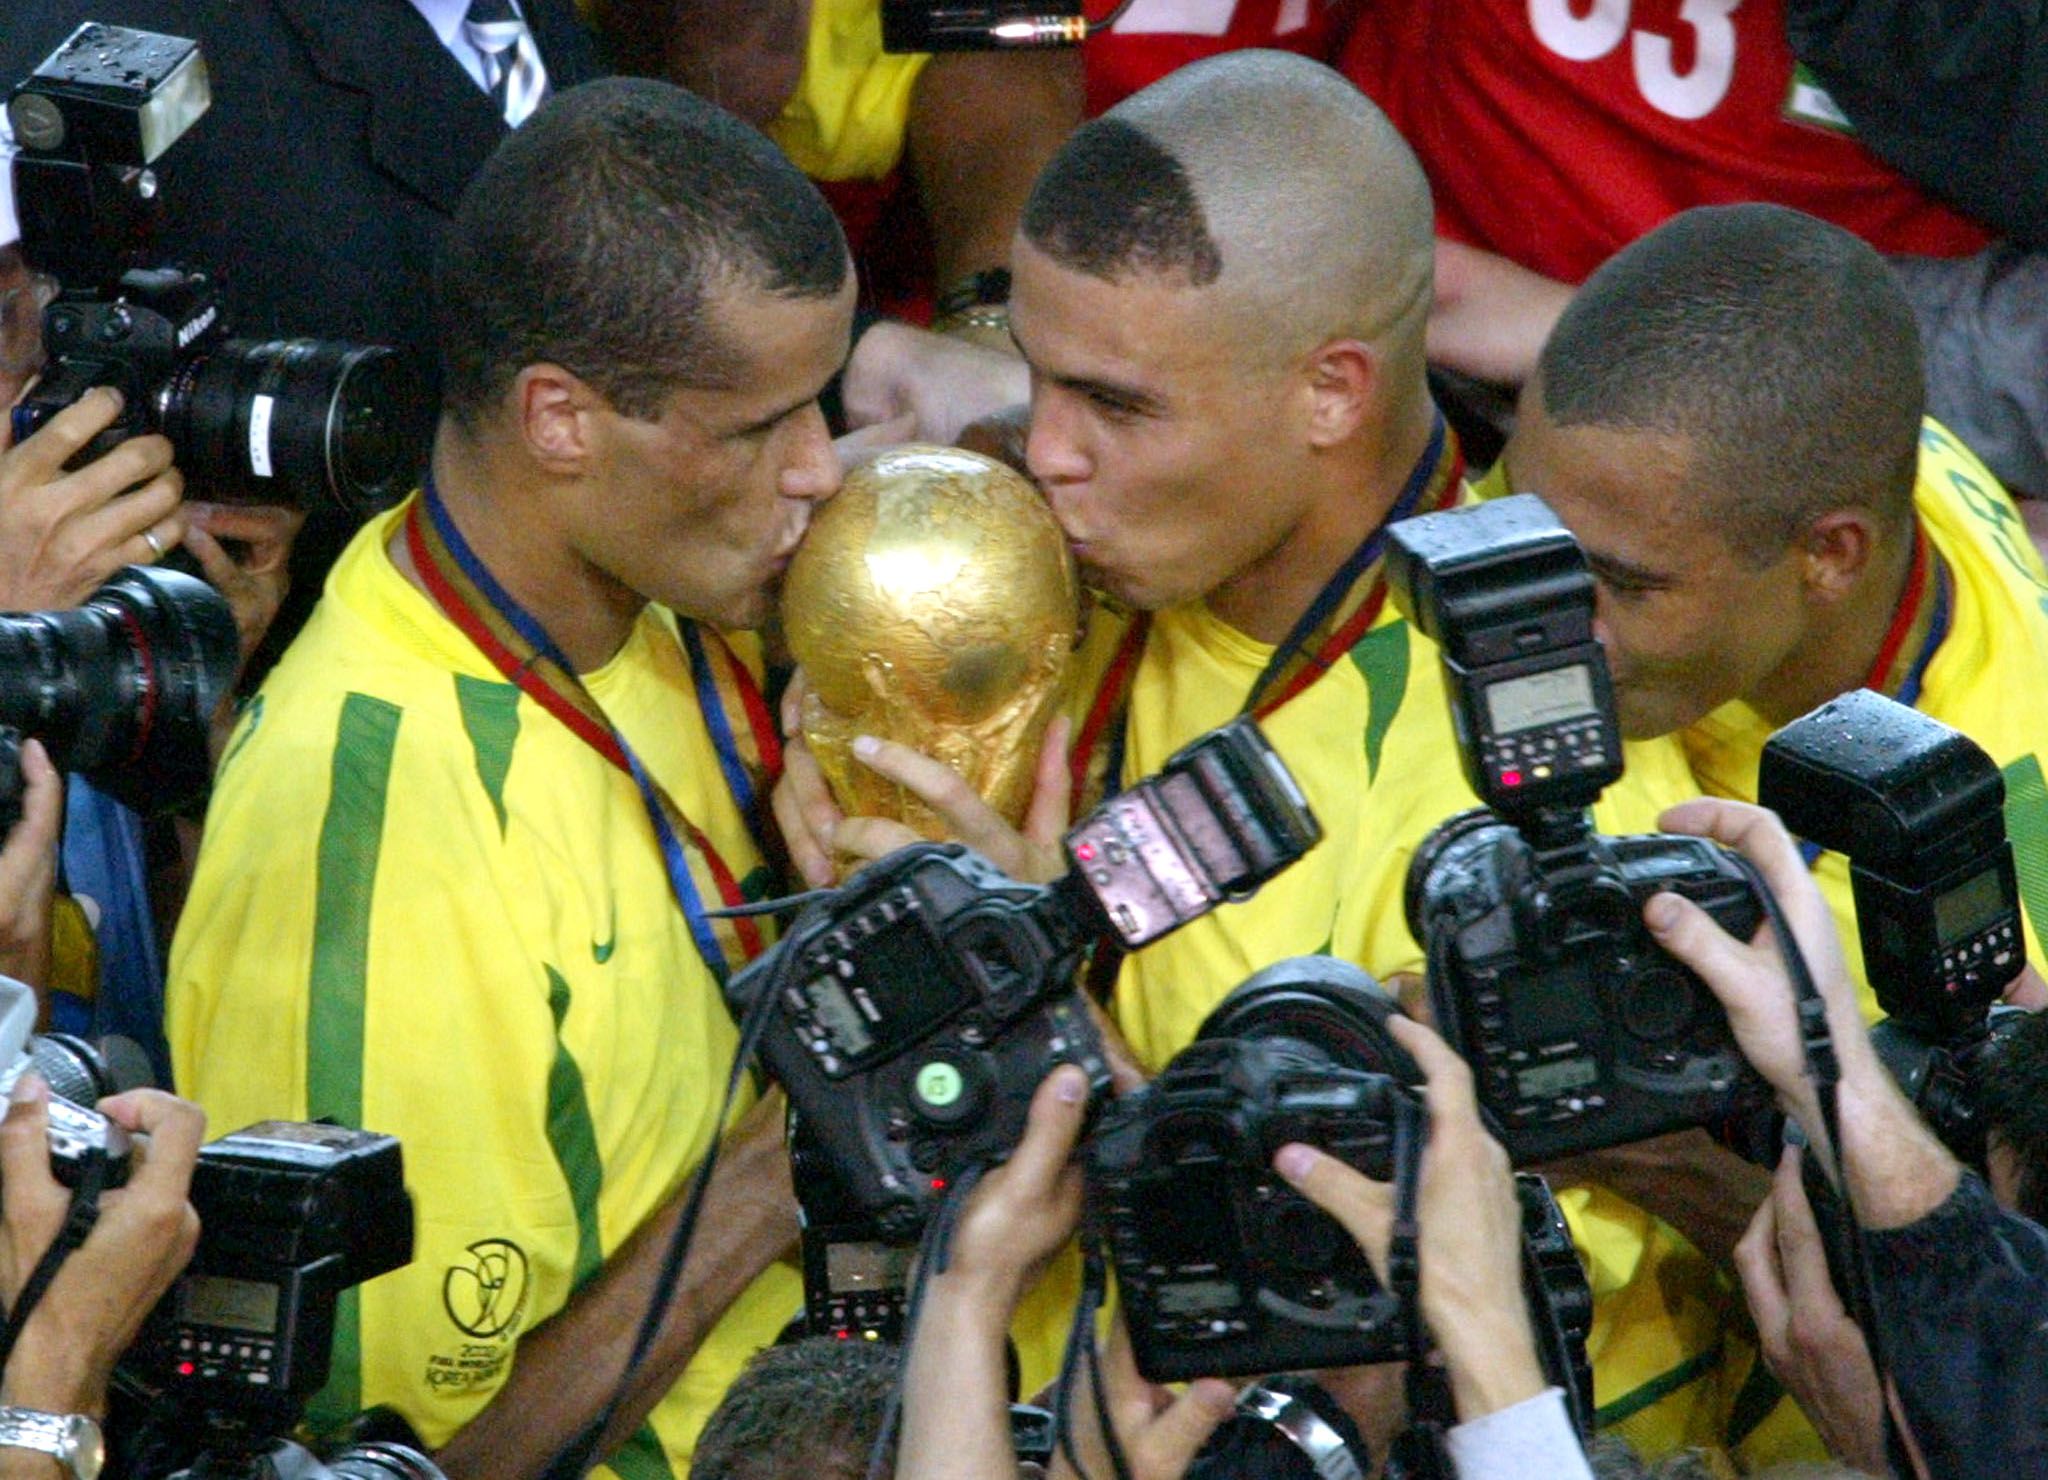 Qatar 2022: How Brazil became World Cup winners in 2002